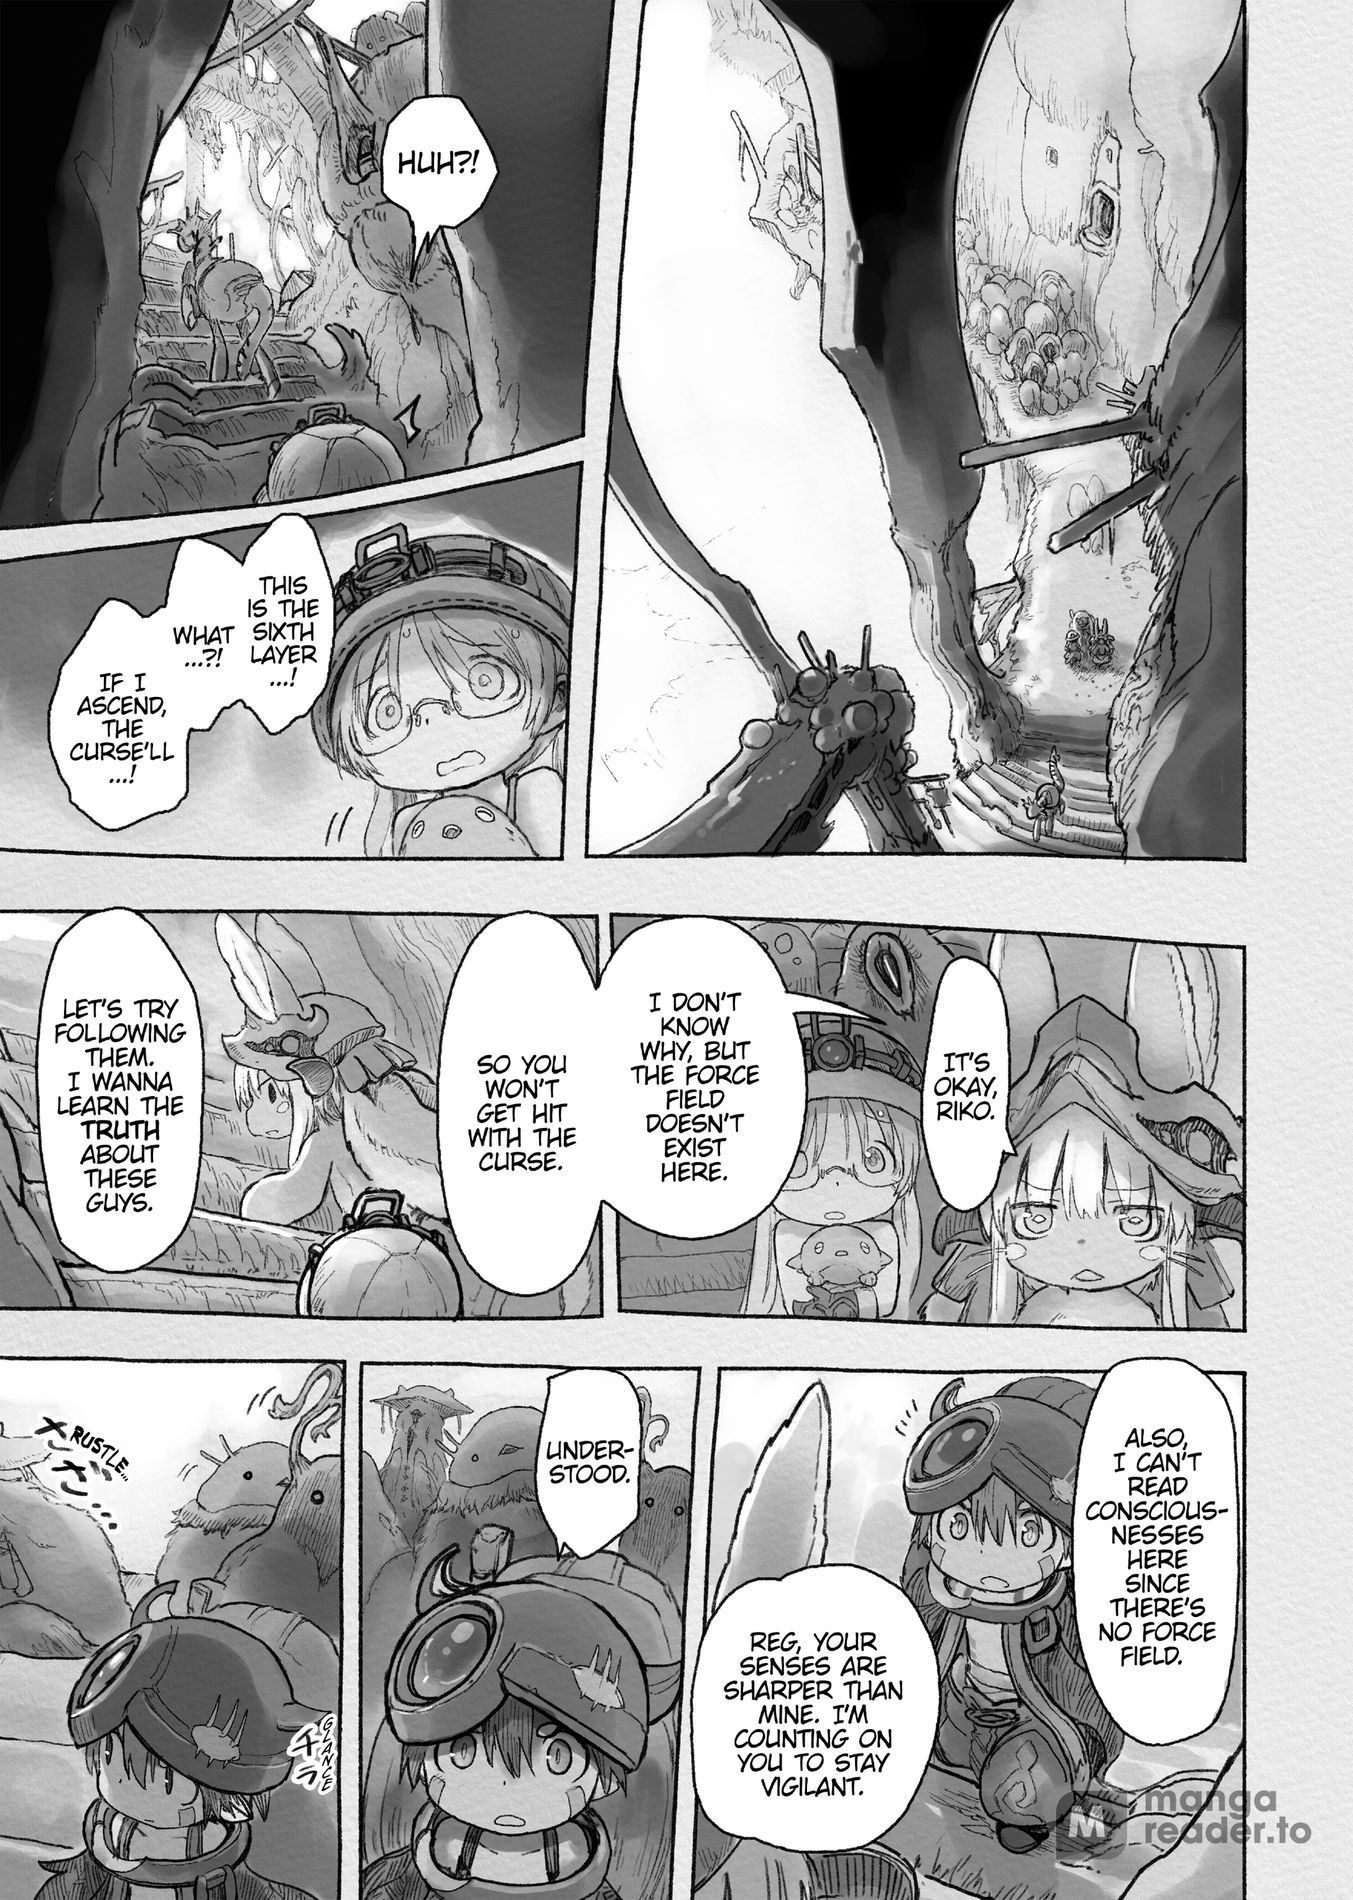 Made in Abyss Chapter 040, Made in Abyss Wiki